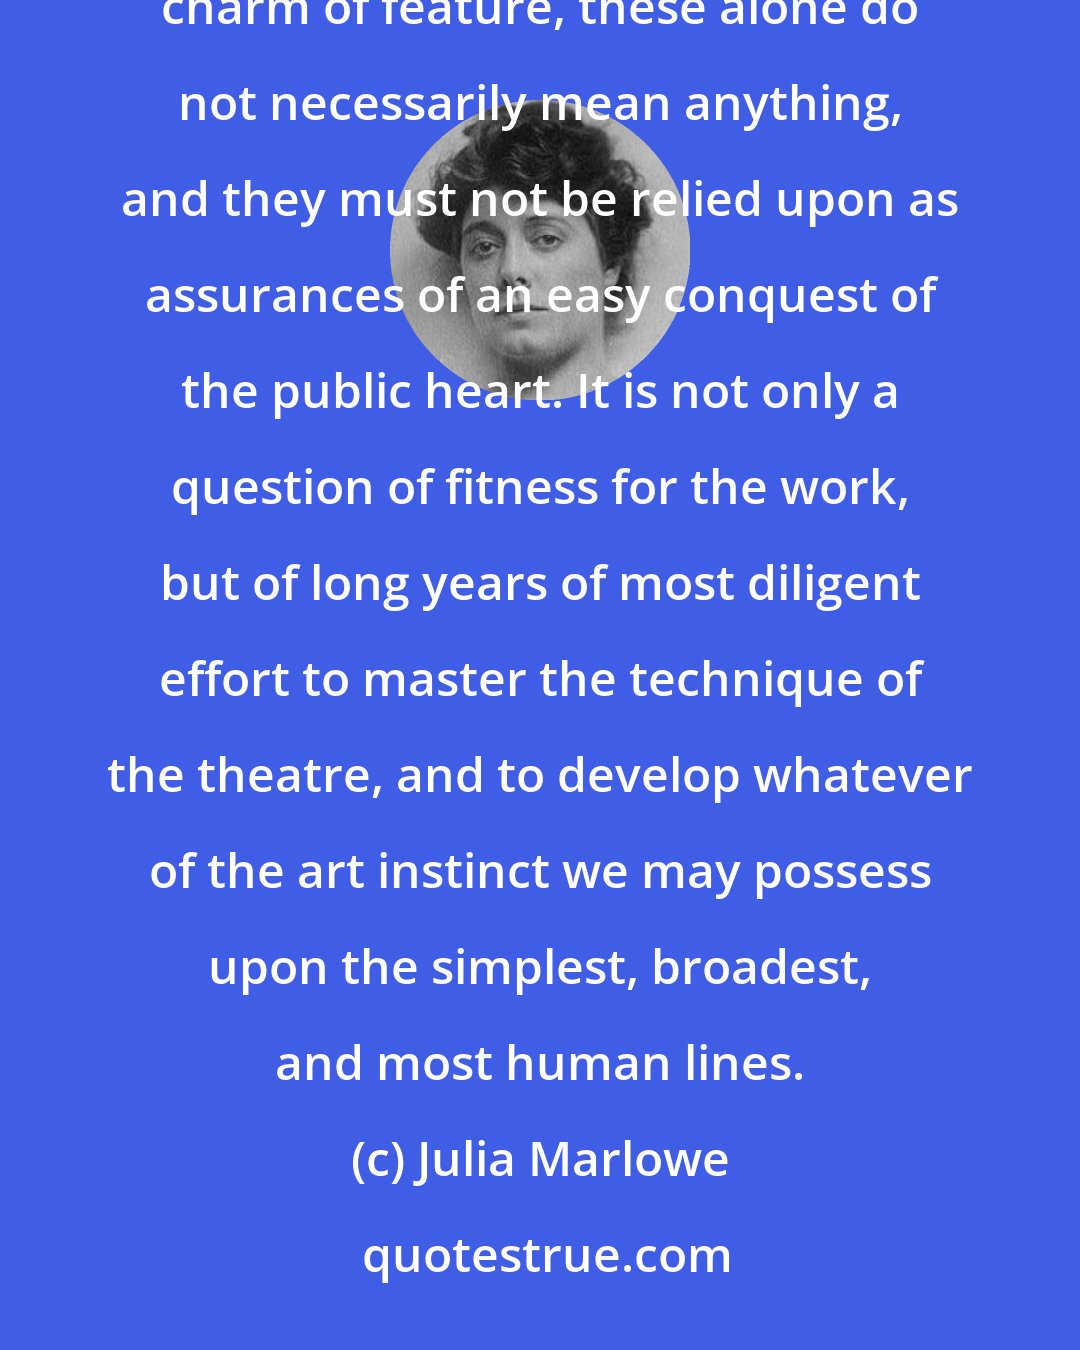 Julia Marlowe: The requirements of the theatre are very great--a strong constitution, energy and unflagging purpose, charm of feature, these alone do not necessarily mean anything, and they must not be relied upon as assurances of an easy conquest of the public heart. It is not only a question of fitness for the work, but of long years of most diligent effort to master the technique of the theatre, and to develop whatever of the art instinct we may possess upon the simplest, broadest, and most human lines.